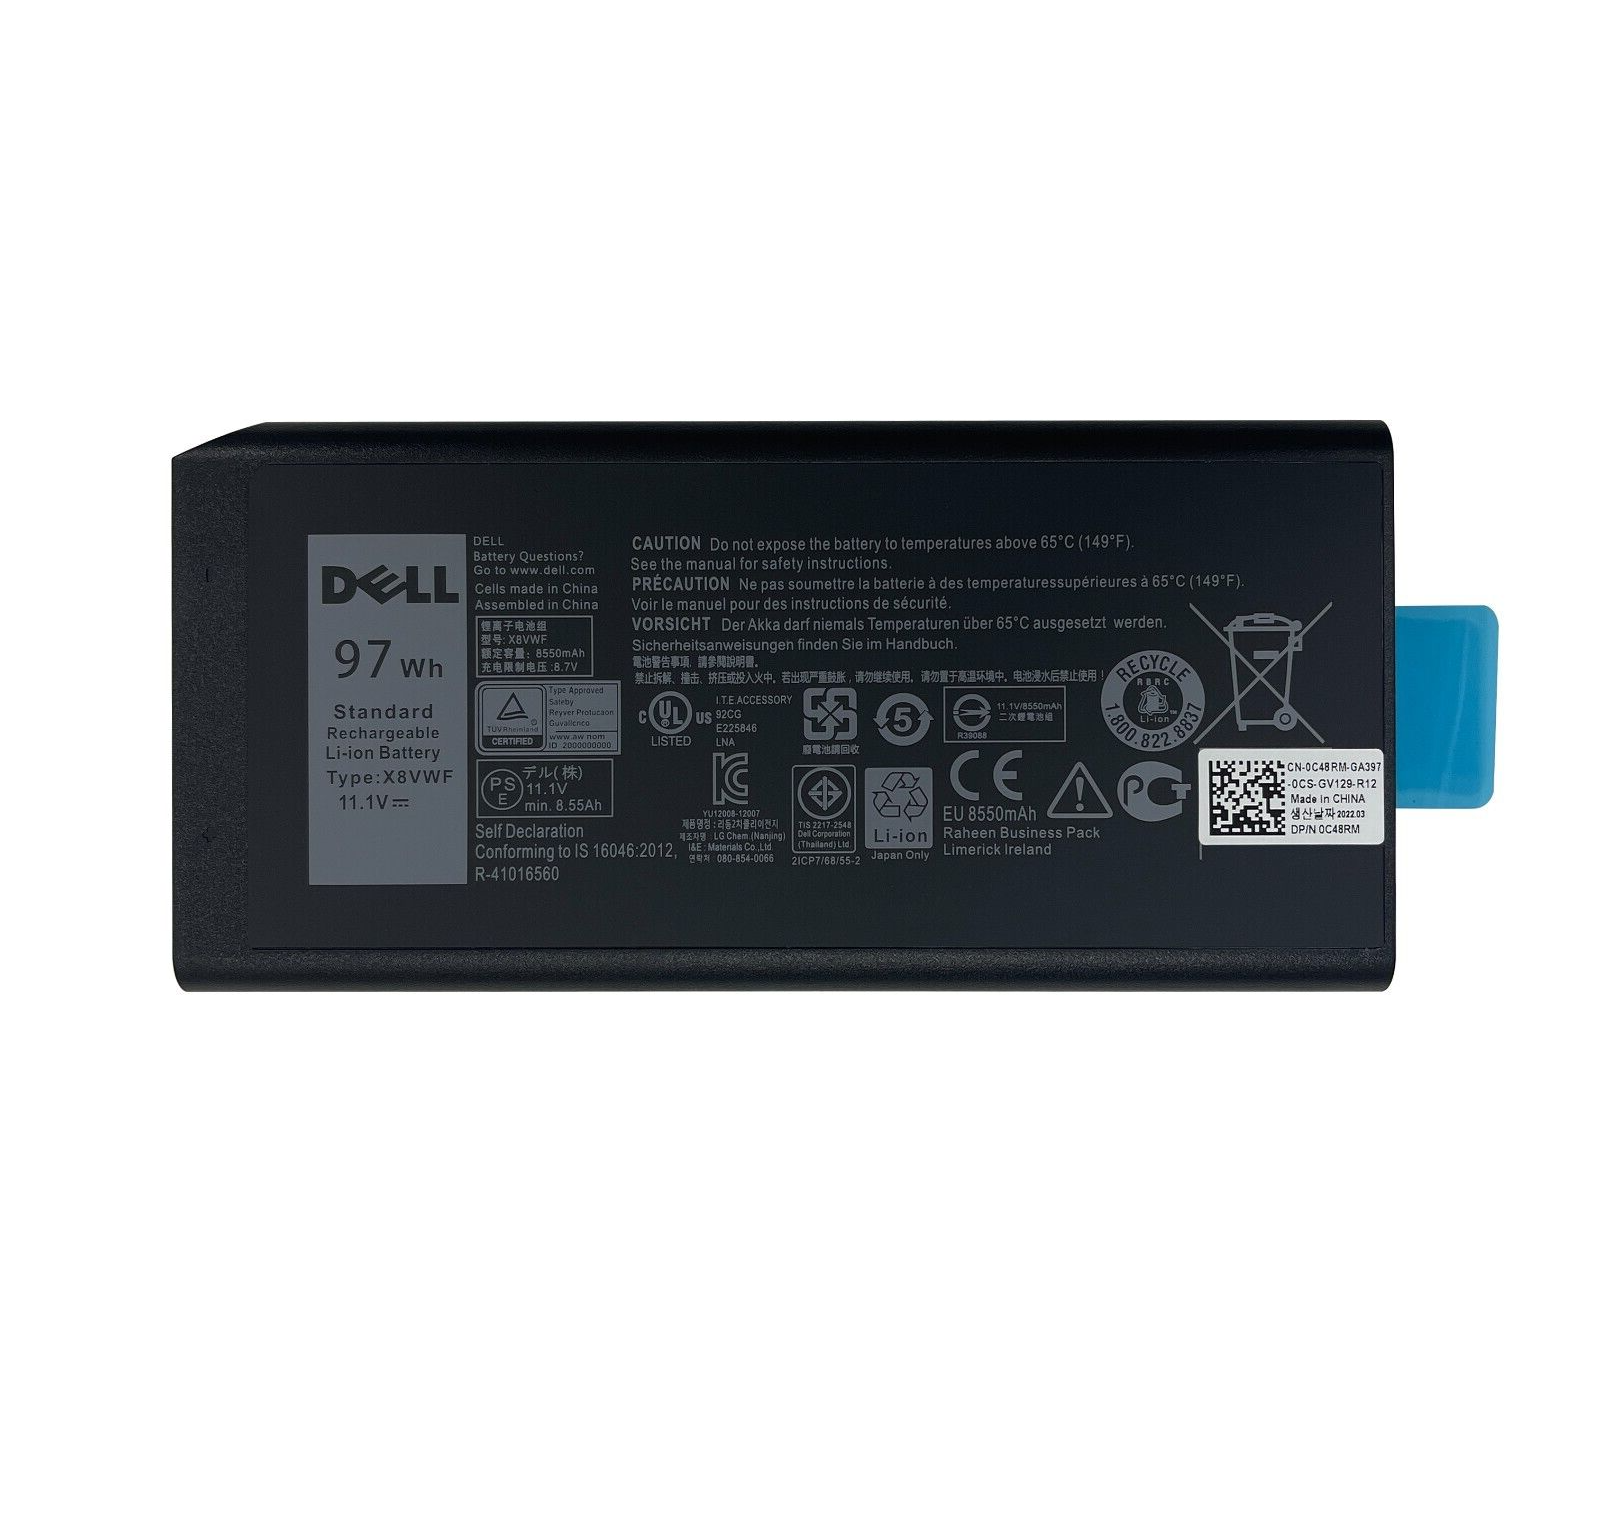 97Wh X8VWF Battery For Dell Latitude 14 Rugged 5404 5414 5405 7404 7414 US